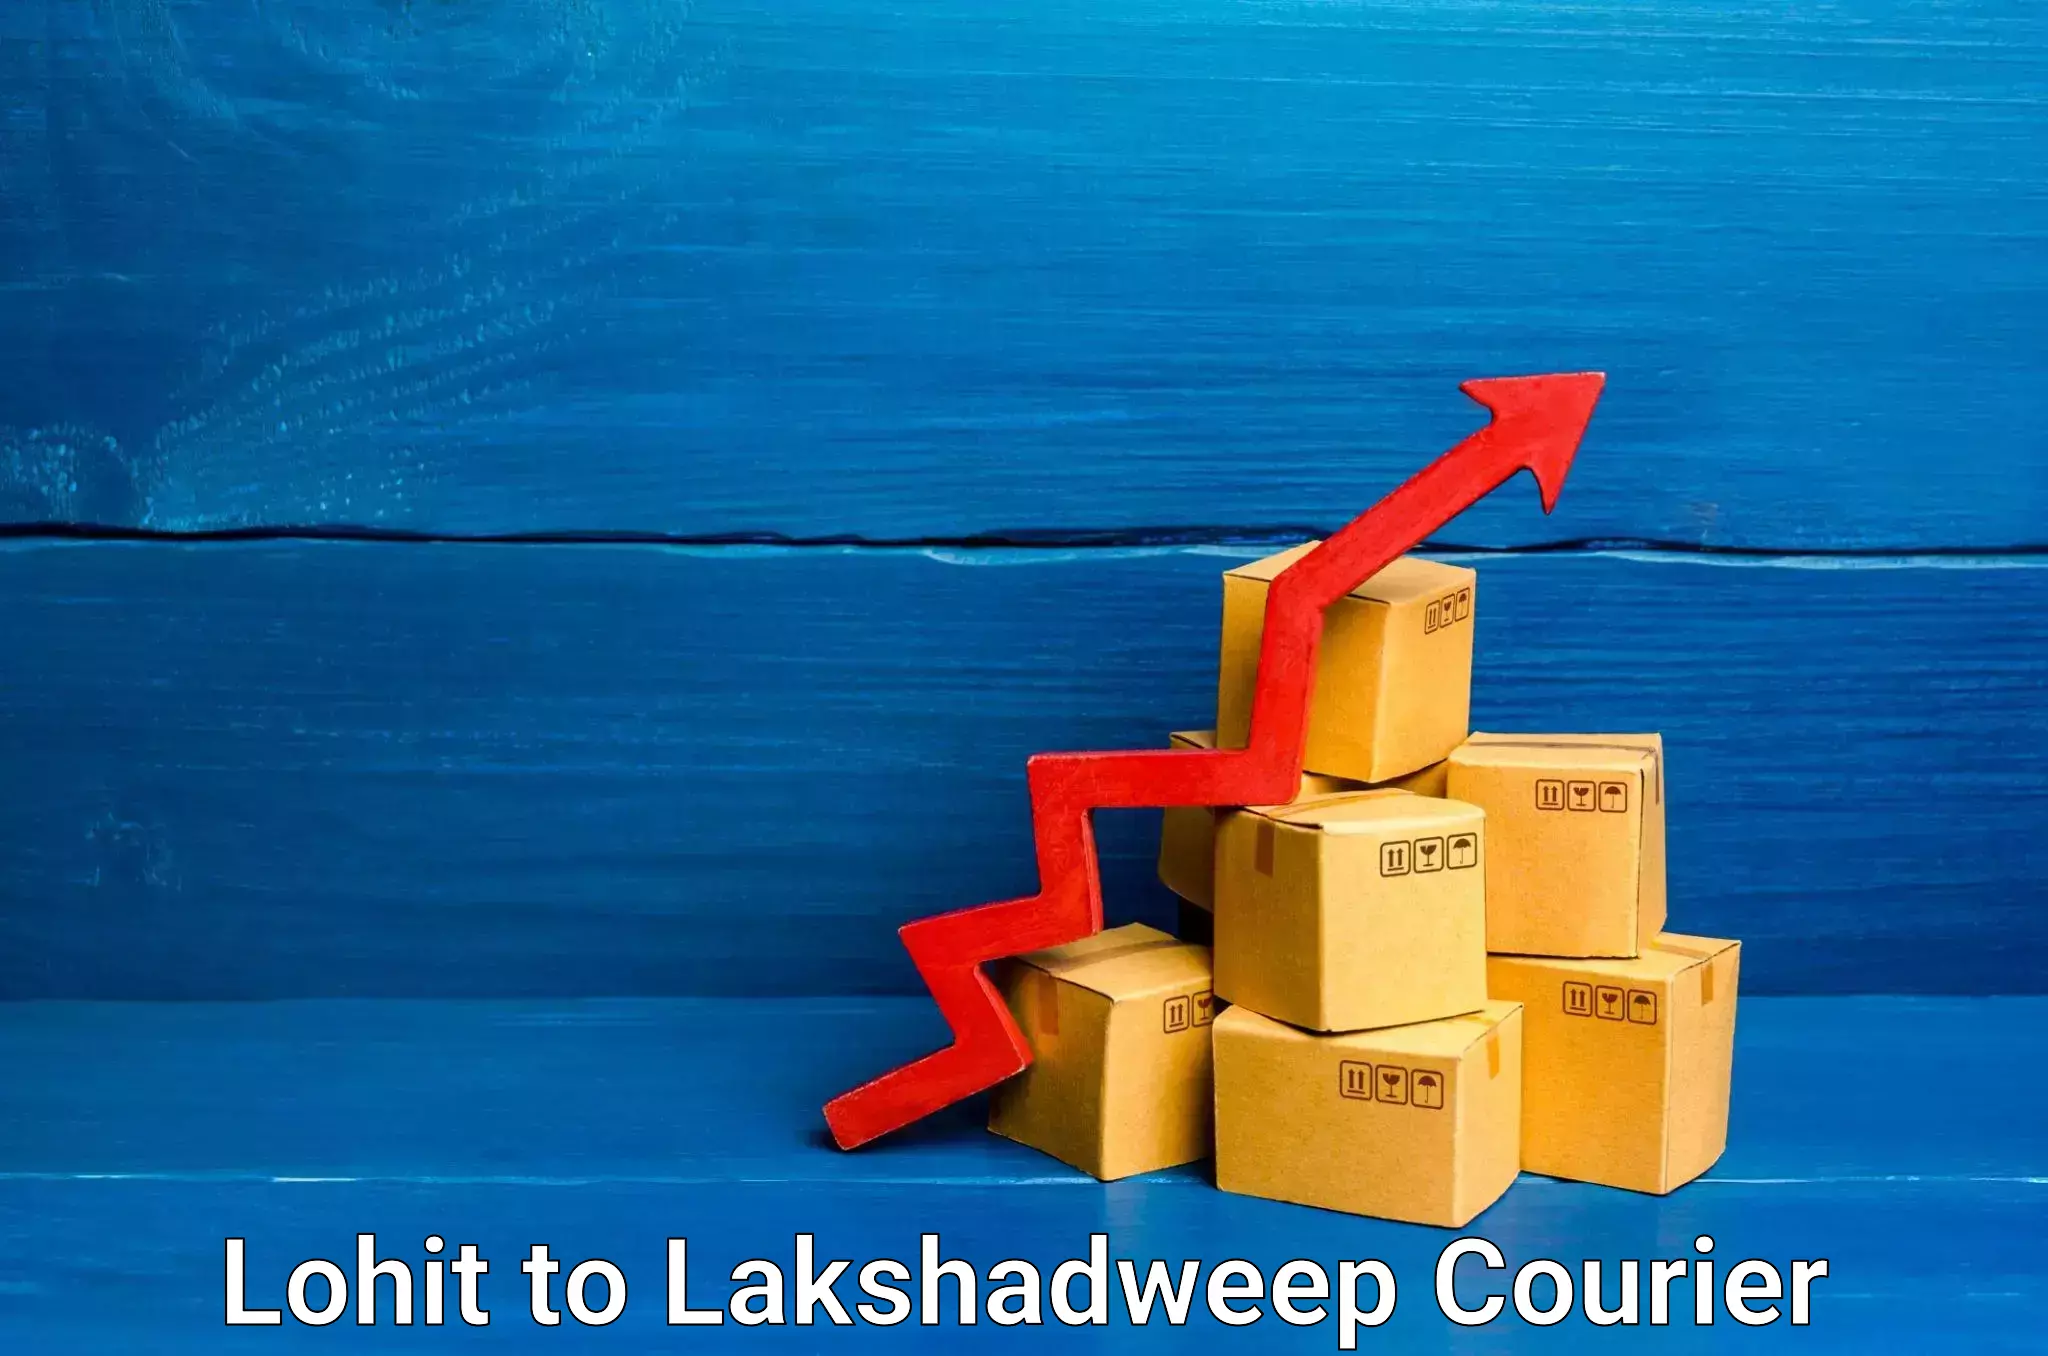 Urban courier service Lohit to Lakshadweep